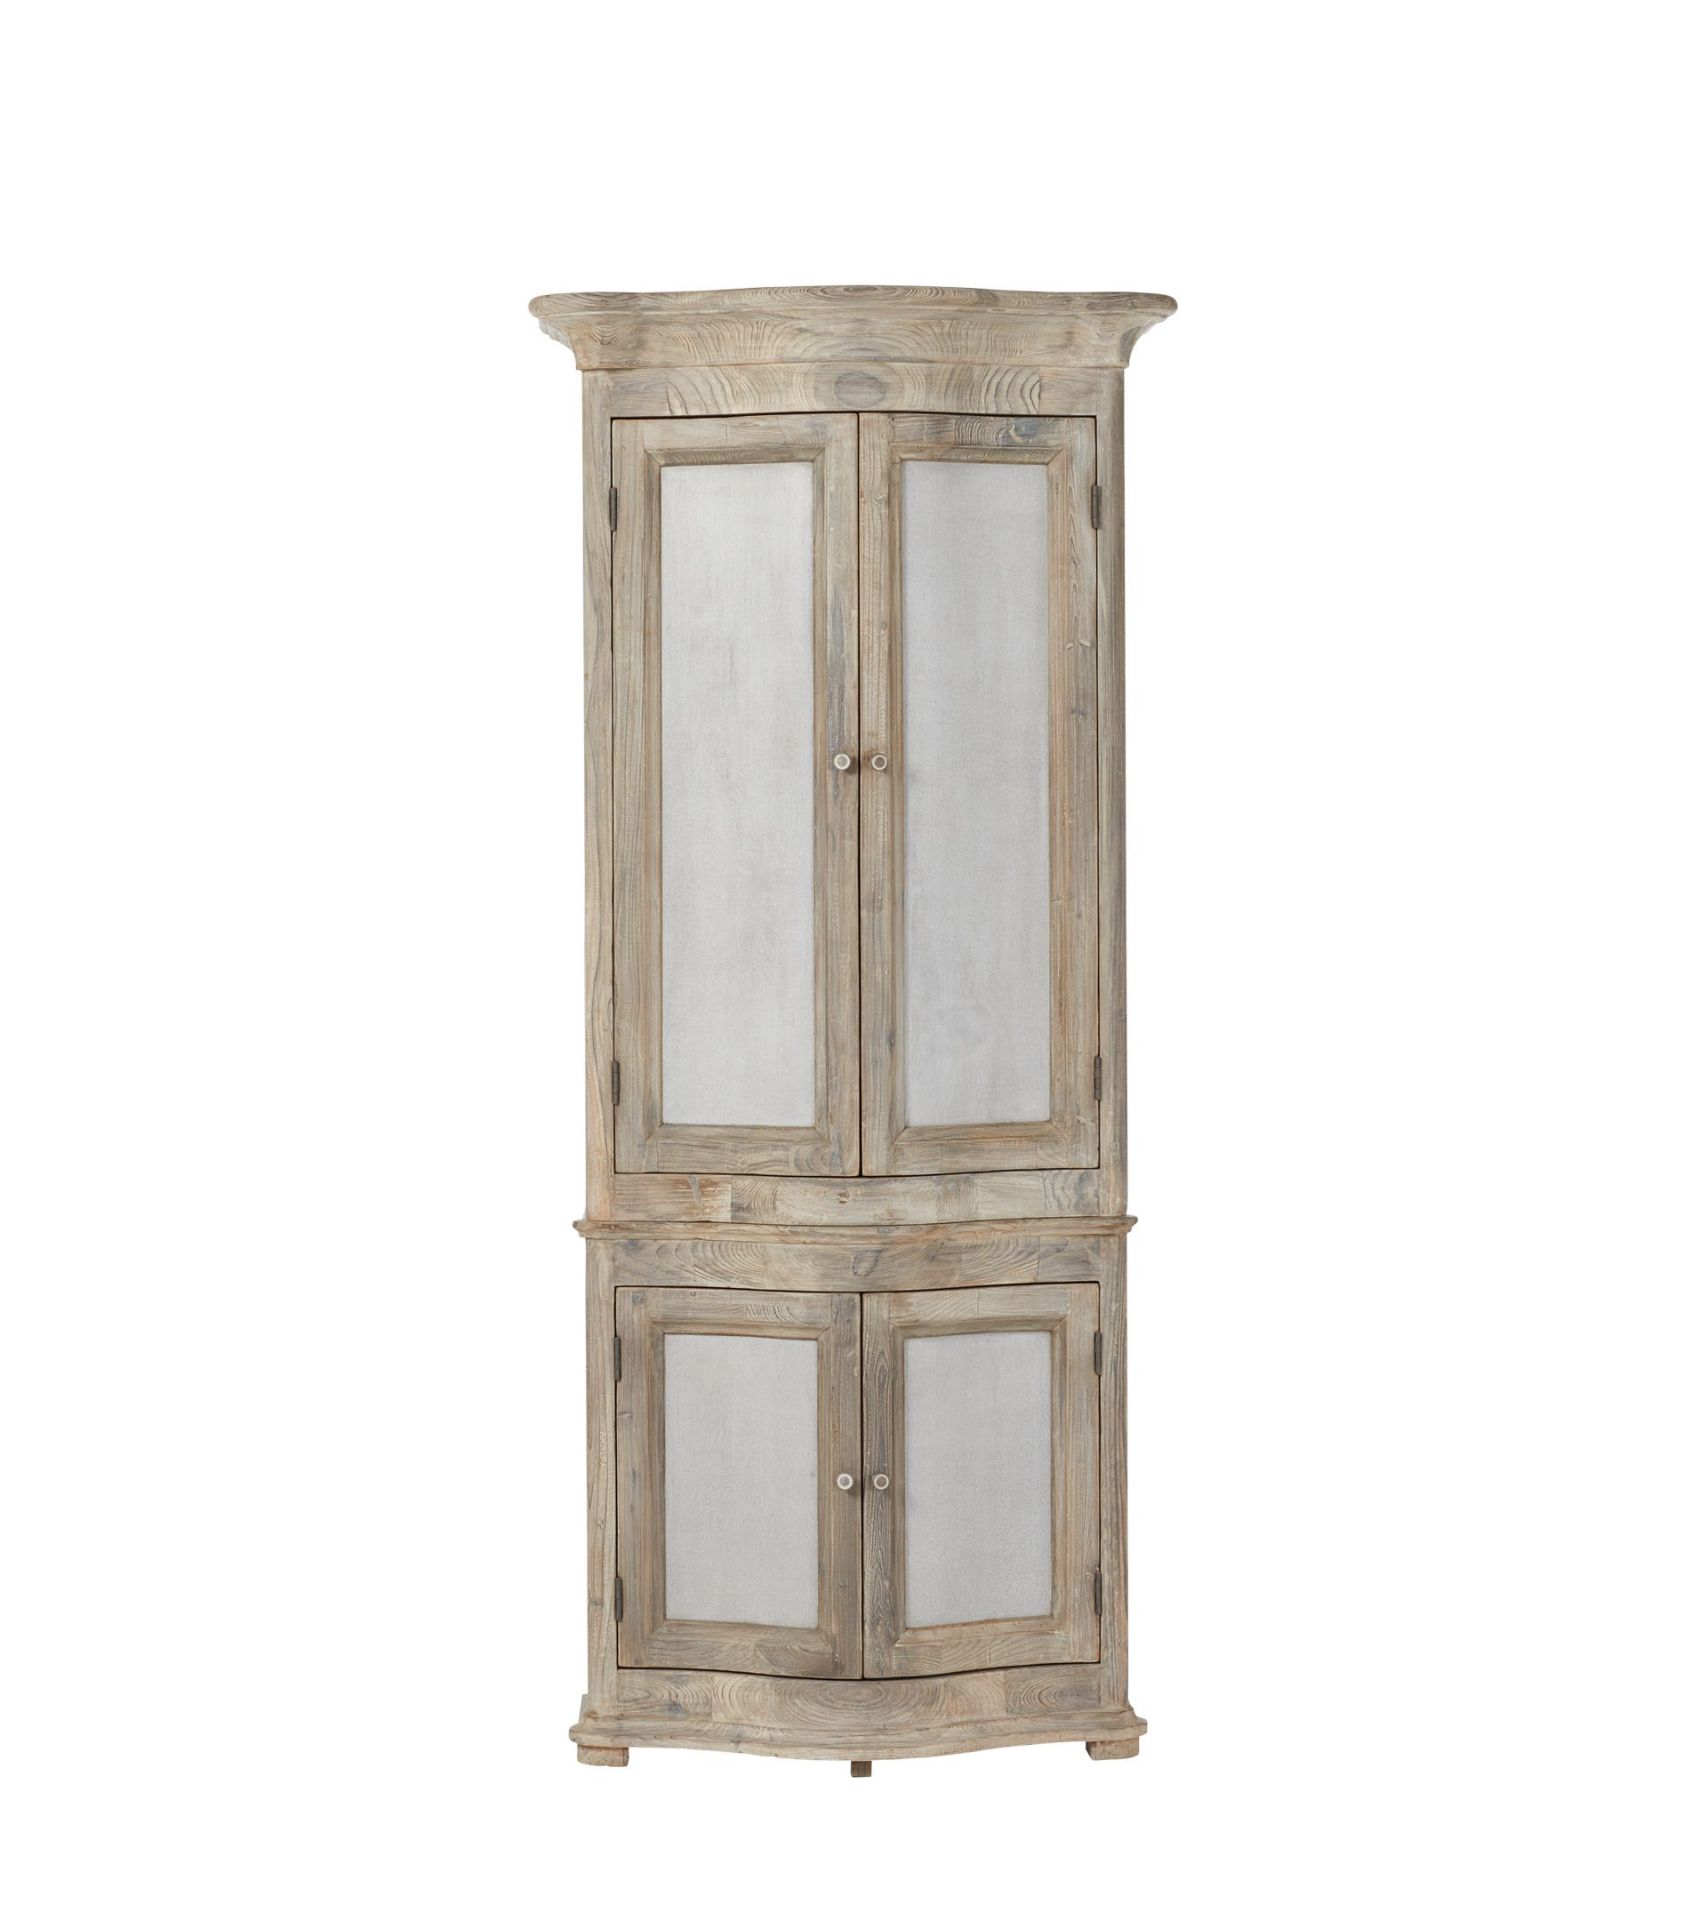 A Gustavian-inspired design, this cabinet has several shelves for storing items such as crockery,